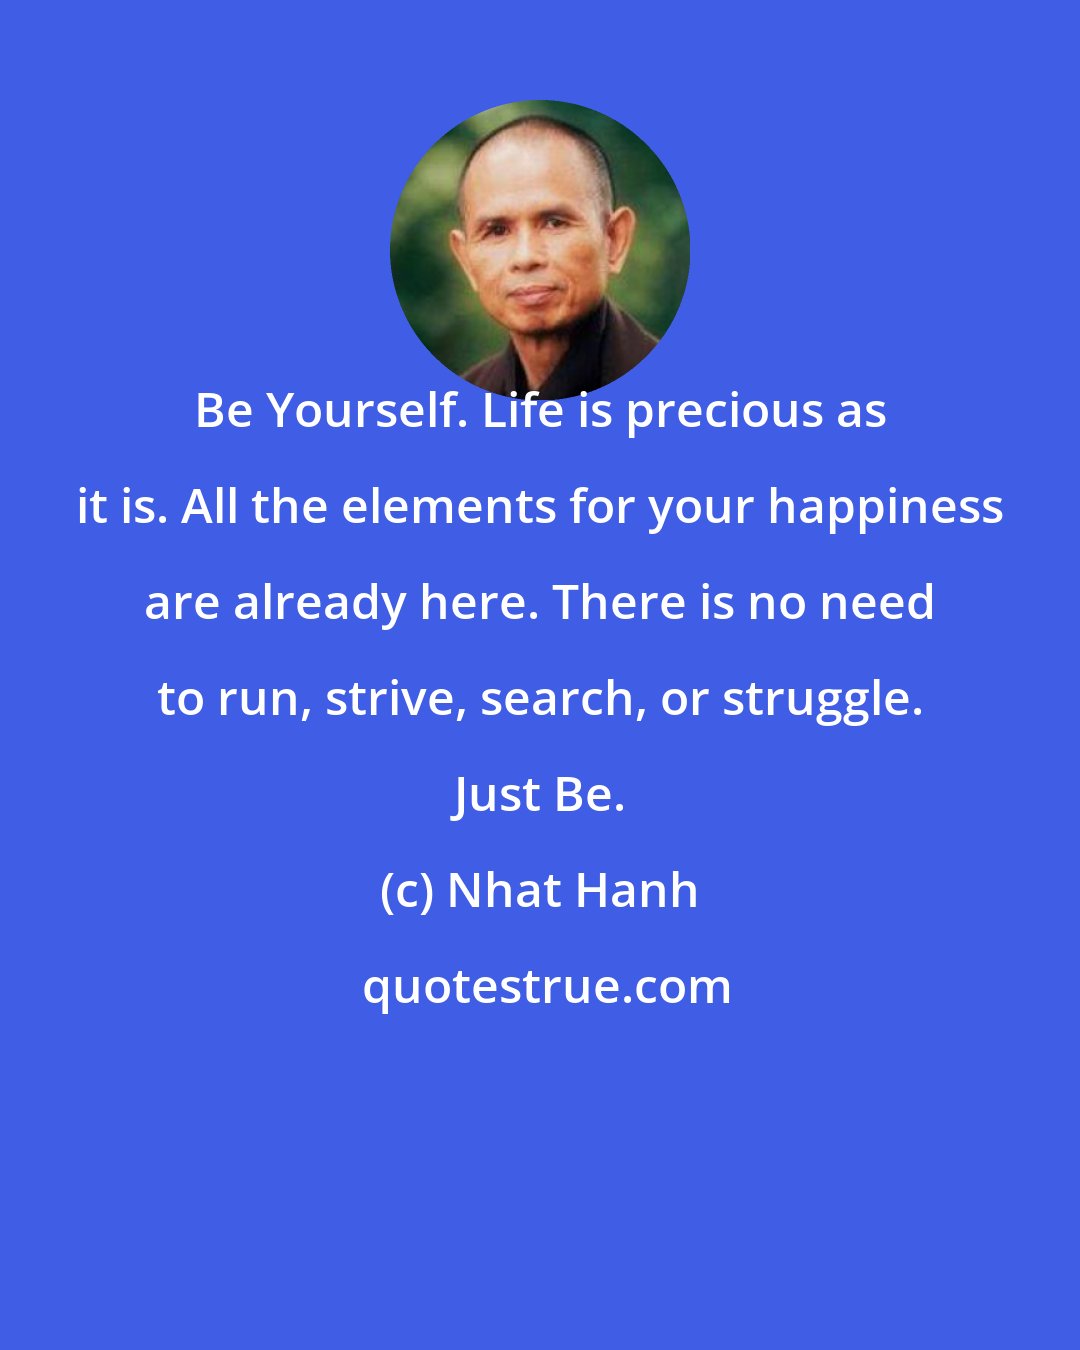 Nhat Hanh: Be Yourself. Life is precious as it is. All the elements for your happiness are already here. There is no need to run, strive, search, or struggle. Just Be.